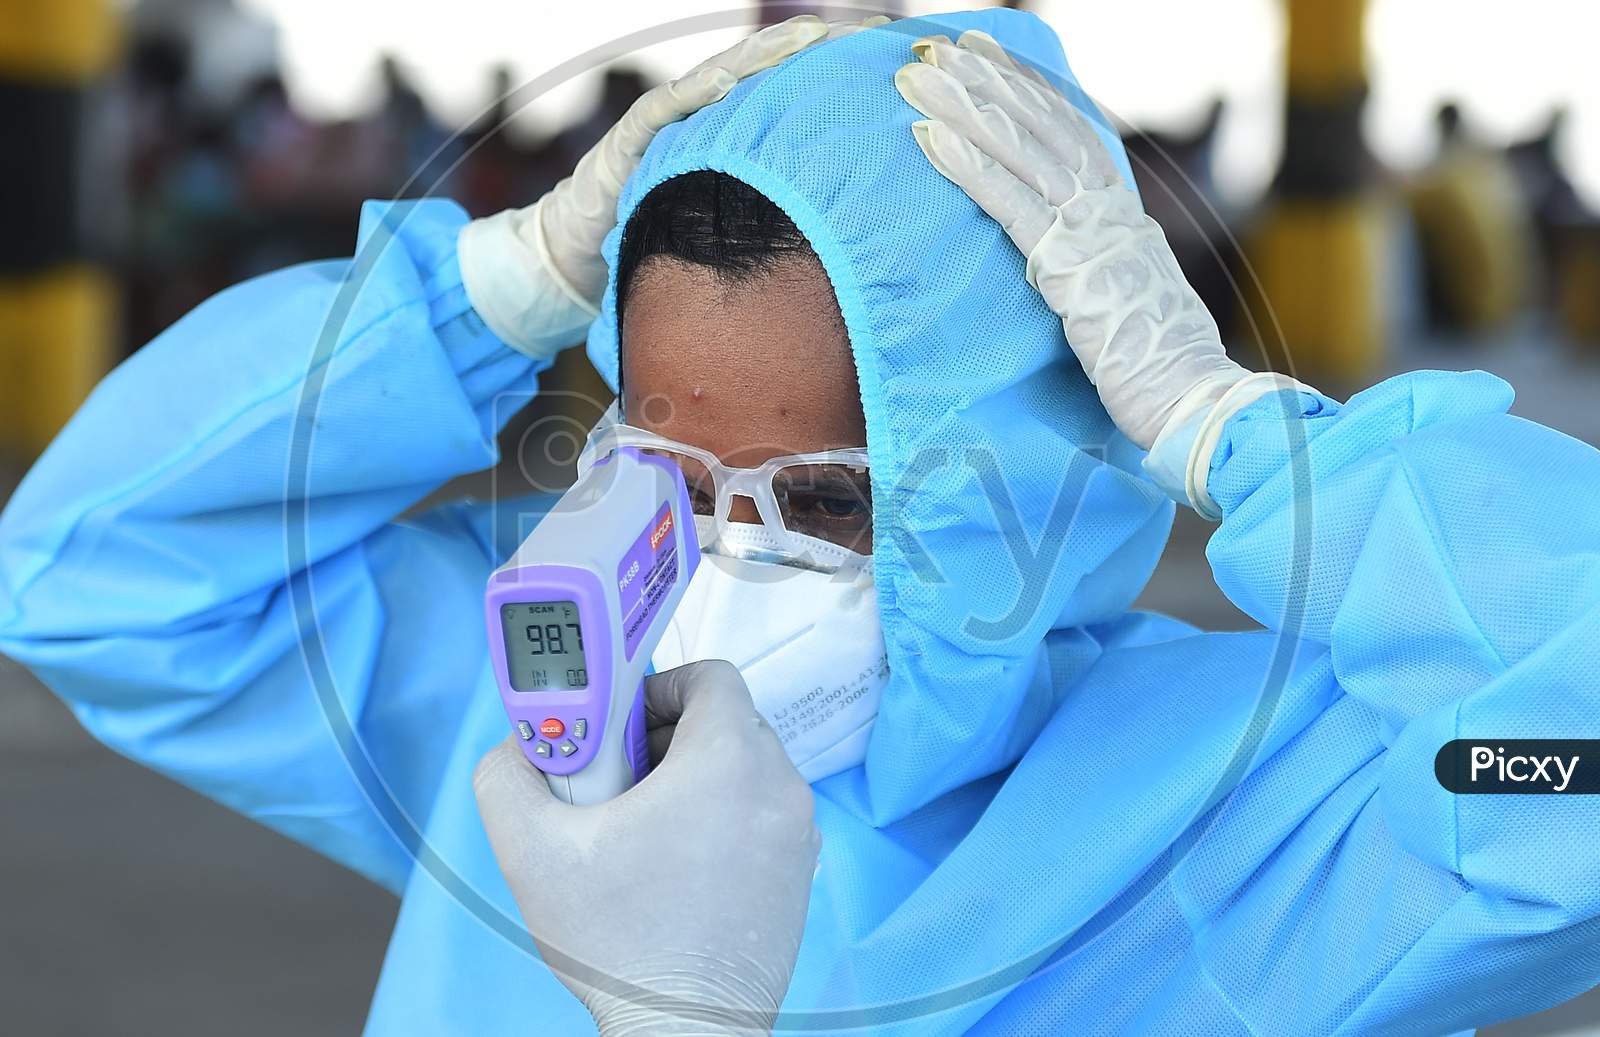 Health Workers Conducting The Thermal Screening During The Ongoing Nationwide Lockdown In The Wake Of Coronavirus Pandemic, In Chennai